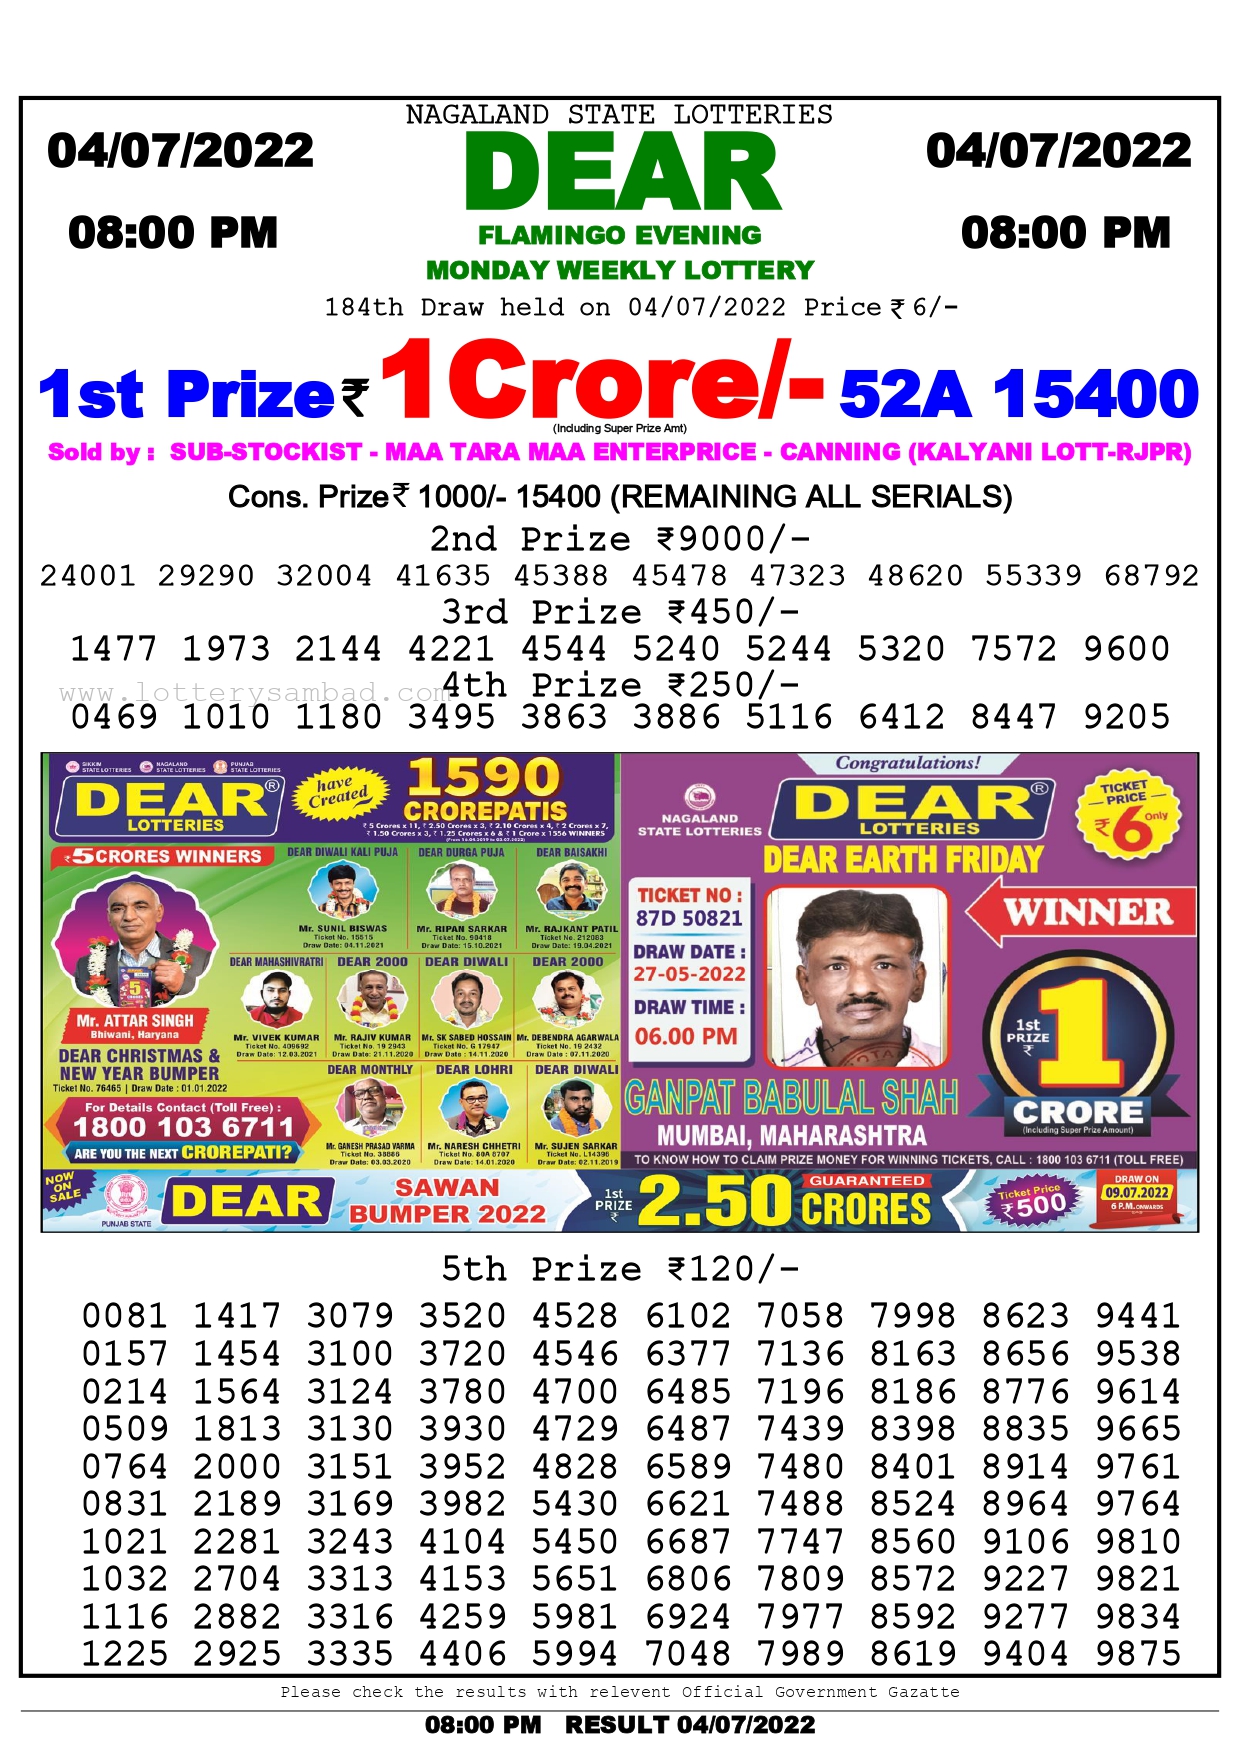 Download Result of Nagaland State Dear 6 Draw 04-07-2022 Draw at 8:00Pm